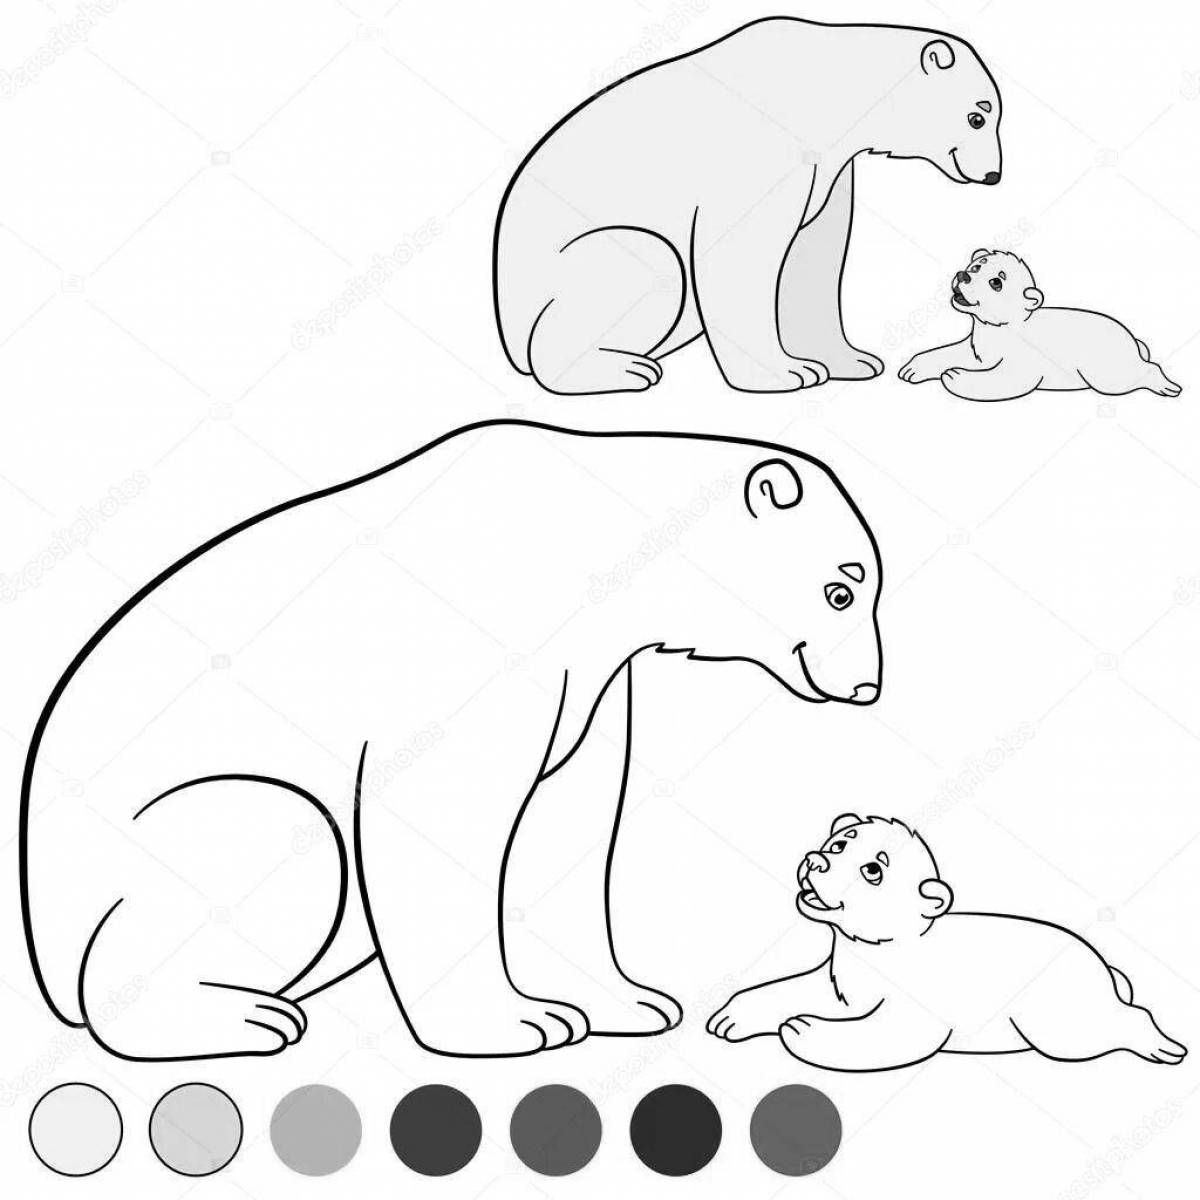 Fancy bear and cub coloring page